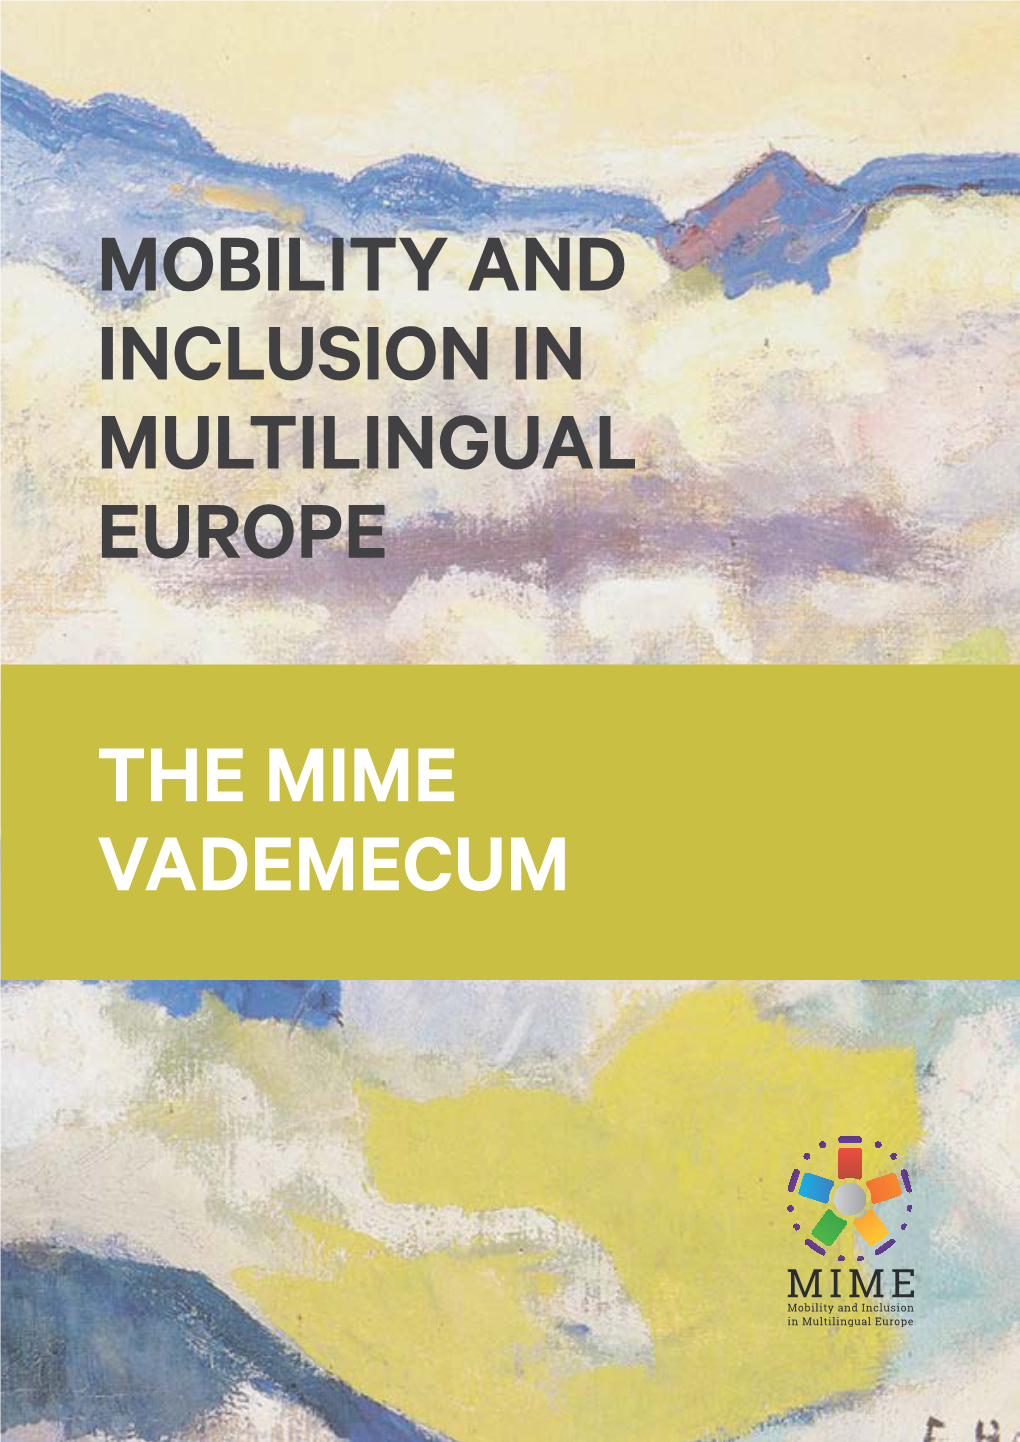 THE MIME VADEMECUM the Research Leading to These Results Has Received Funding from the European Community’S Seventh Framework Programme Under Grant Agreement No